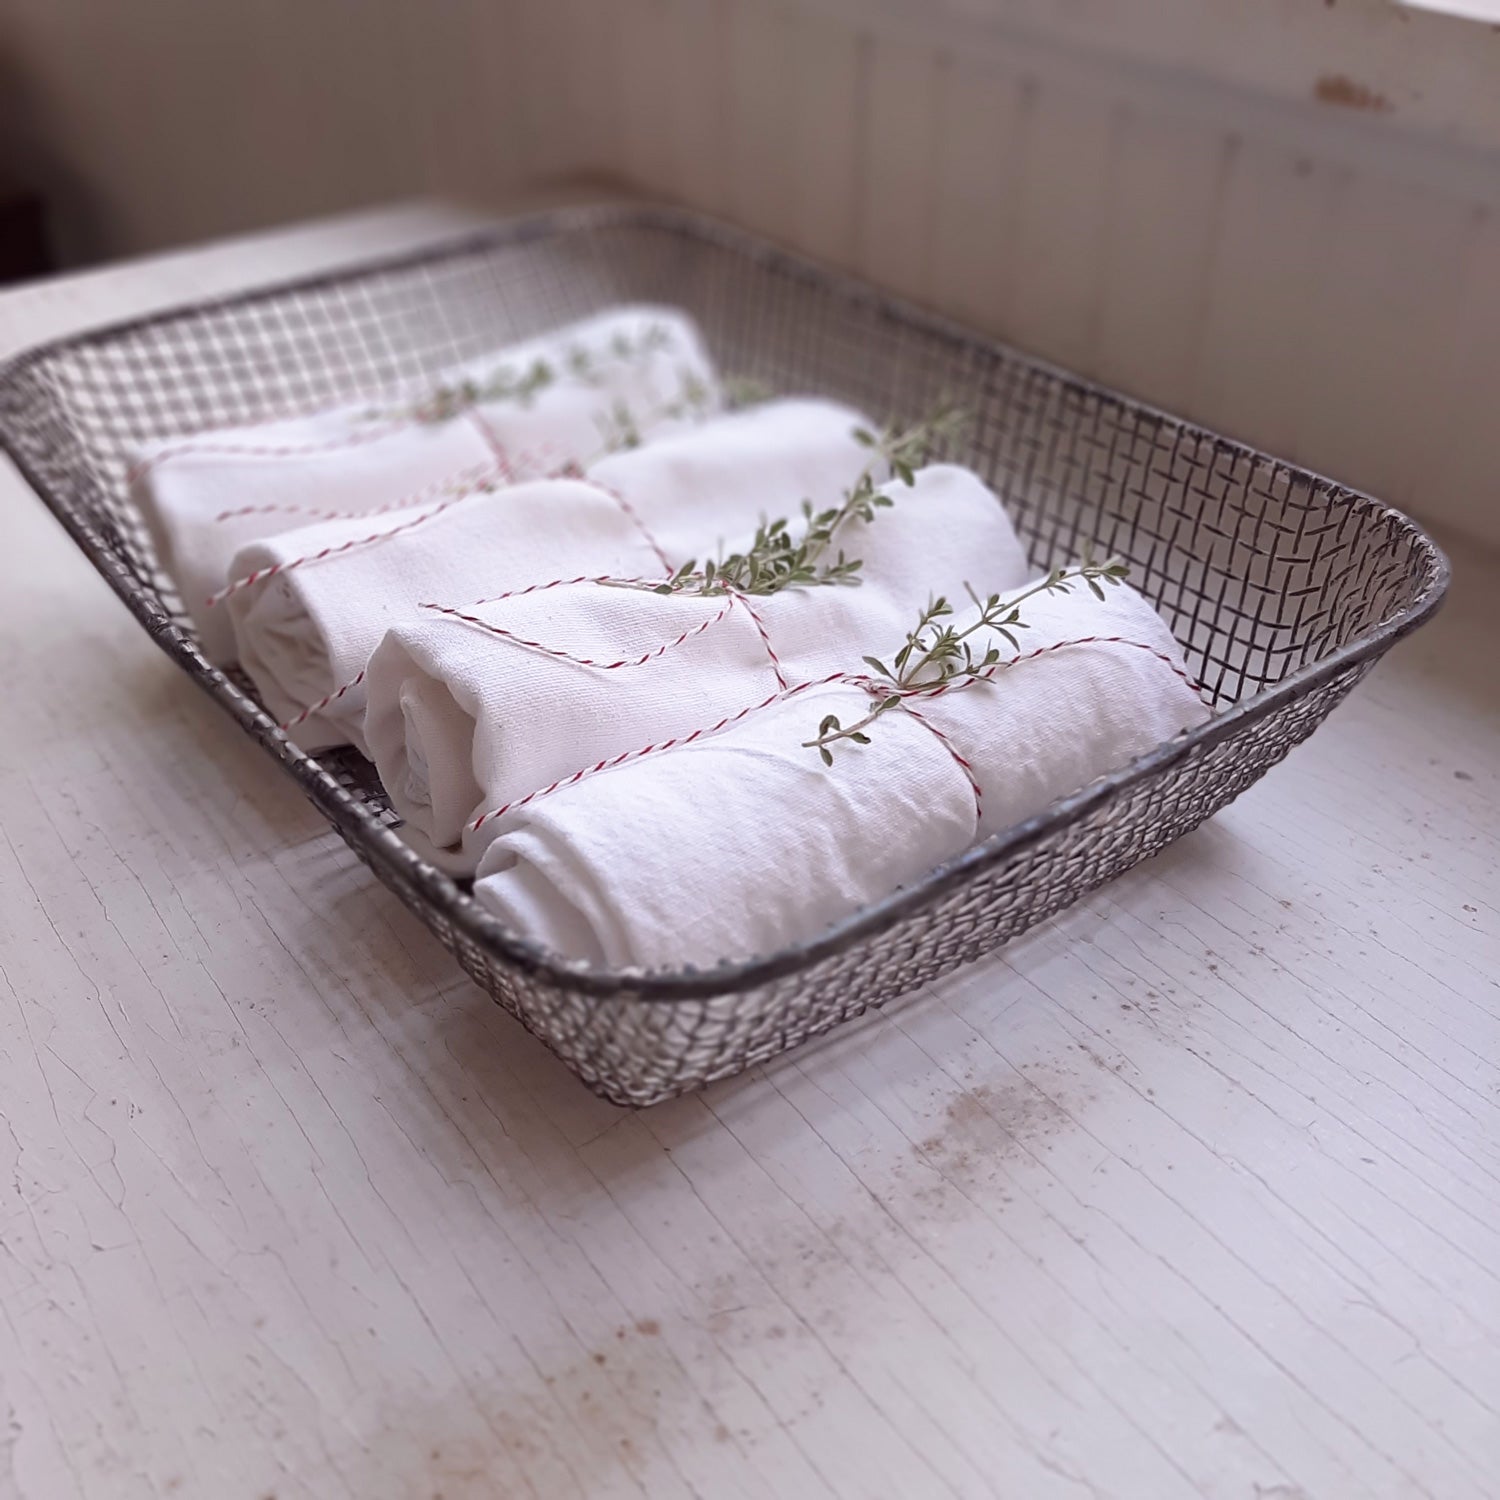 Our Wire Tray Basket offers quintessential vintage farmhouse style. This charming shallow wire basket is perfect for berries and fruit or for mail and more. This antique inspired wire mesh tray basket features a weathered metal finish with hints of chippy white paint.